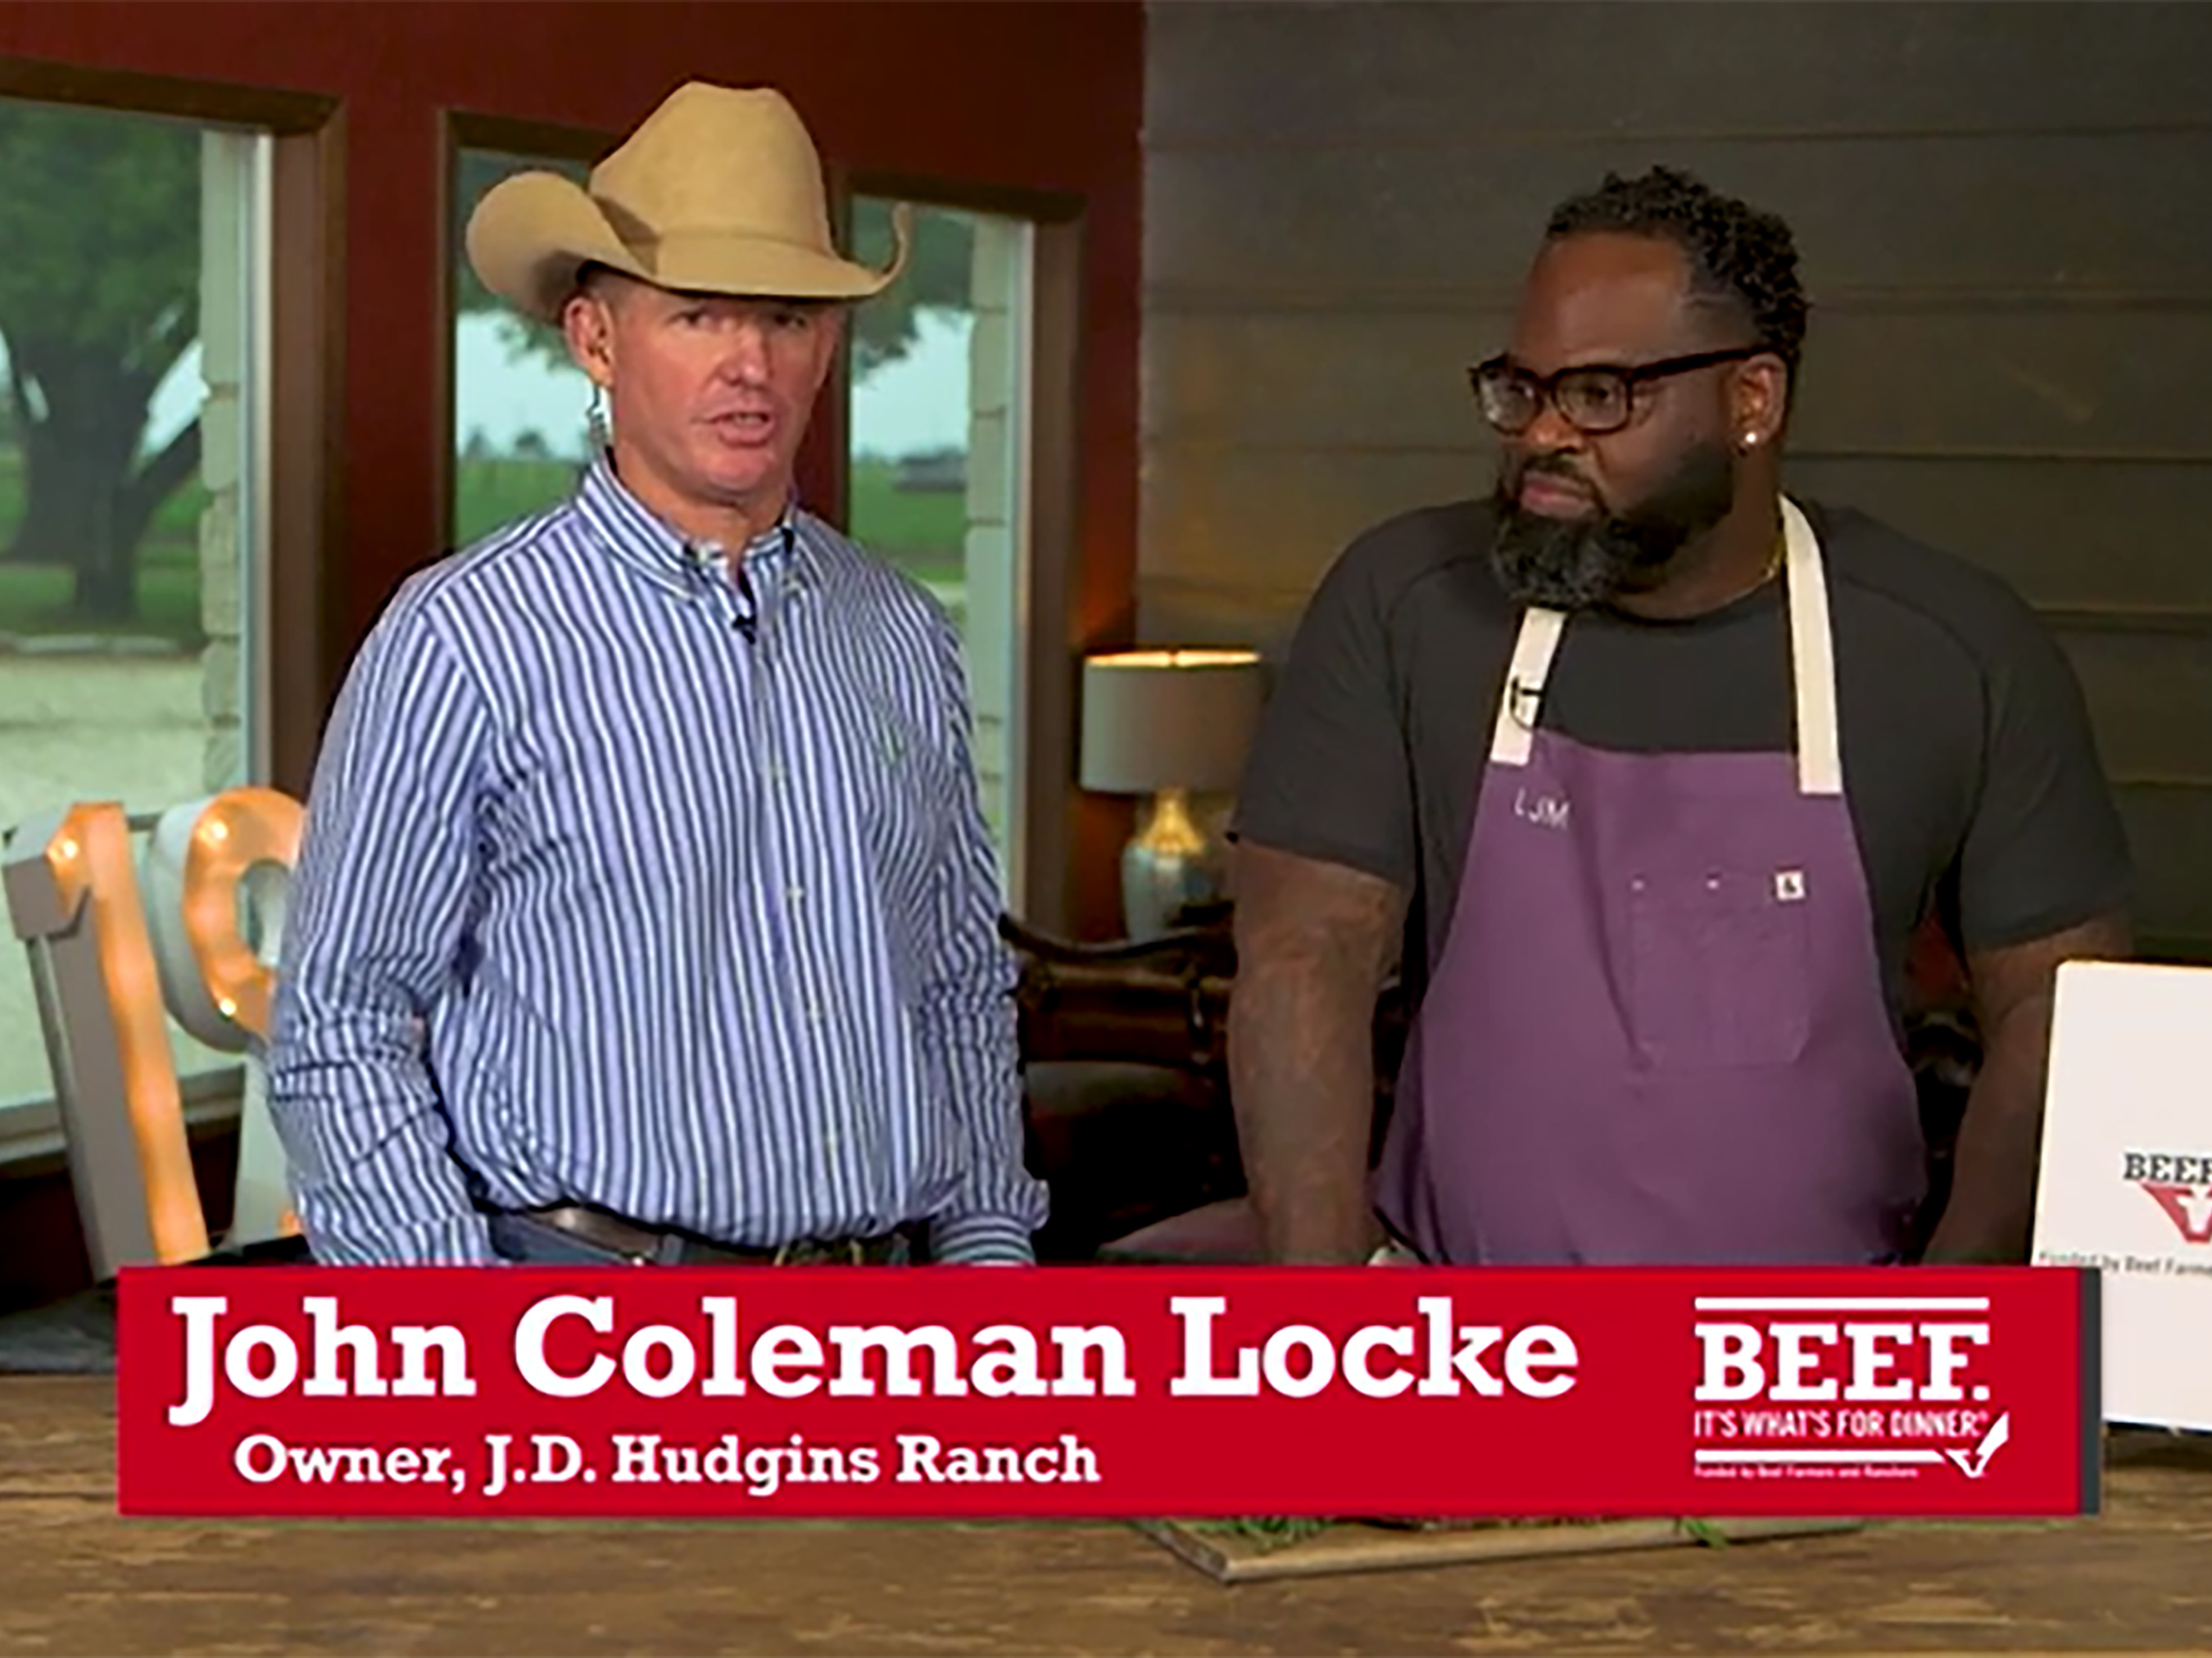 Cattle rancher and celebrity chef discuss sustainable beef and recipes.